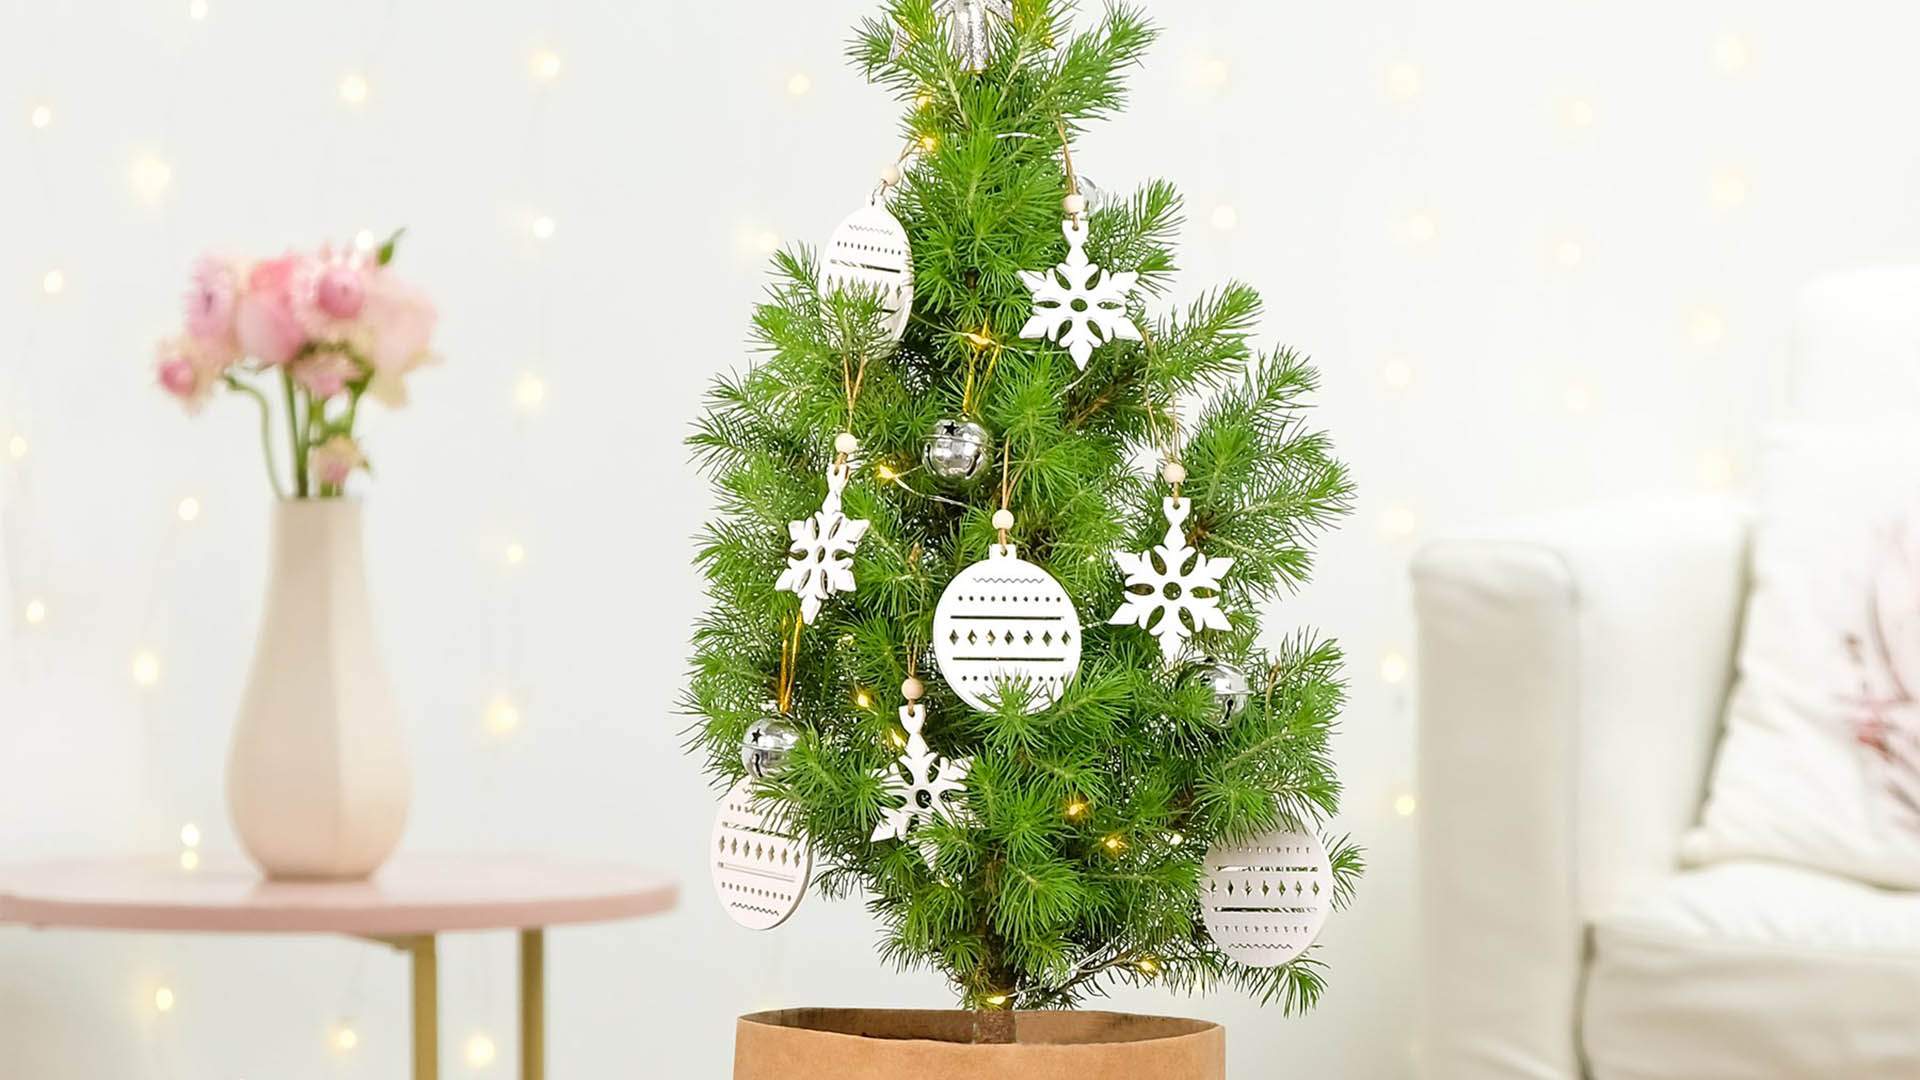 You Can Get Floraly's Adorable Tiny Living Christmas Trees Delivered to Your Door This Festive Season